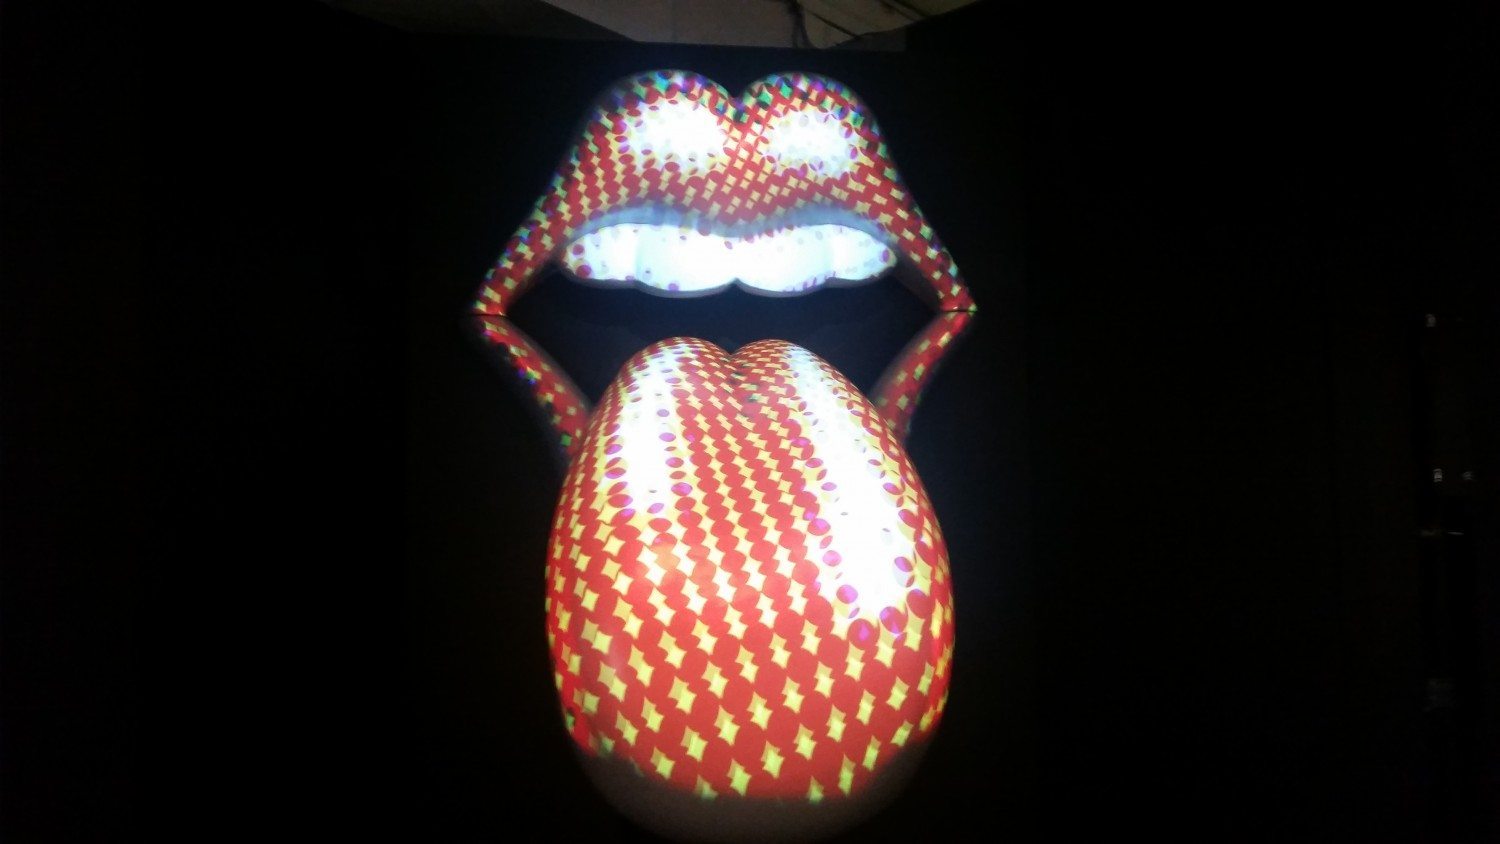 “Exhibitionism” is a must-go for Rolling Stones fans in Manhattan